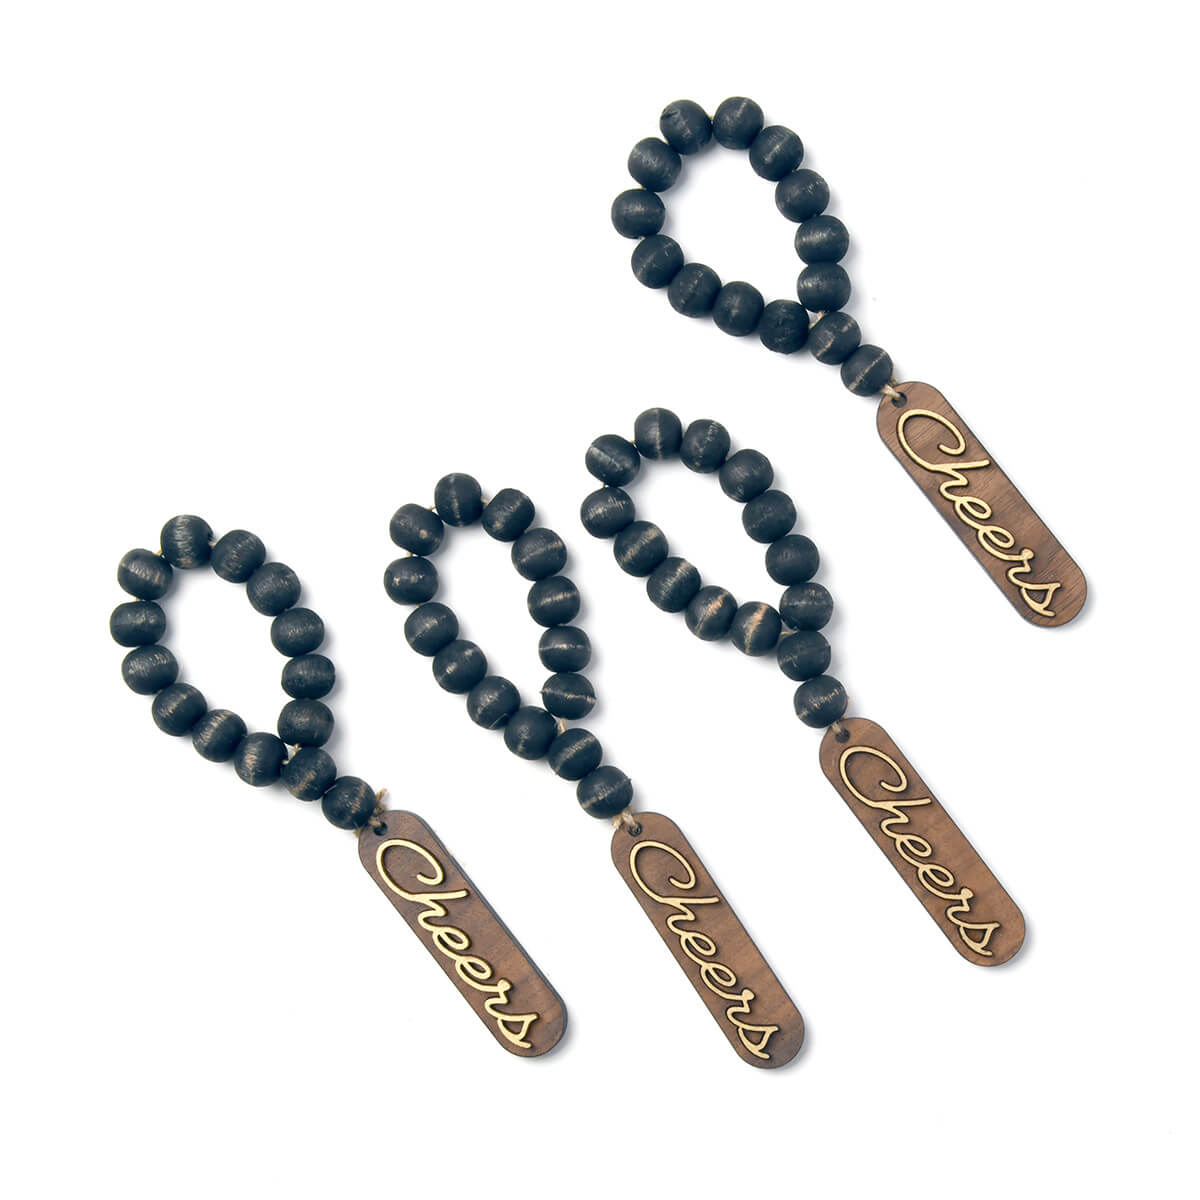 napkin ring made of black wood beads, the word cheers attached to the beads